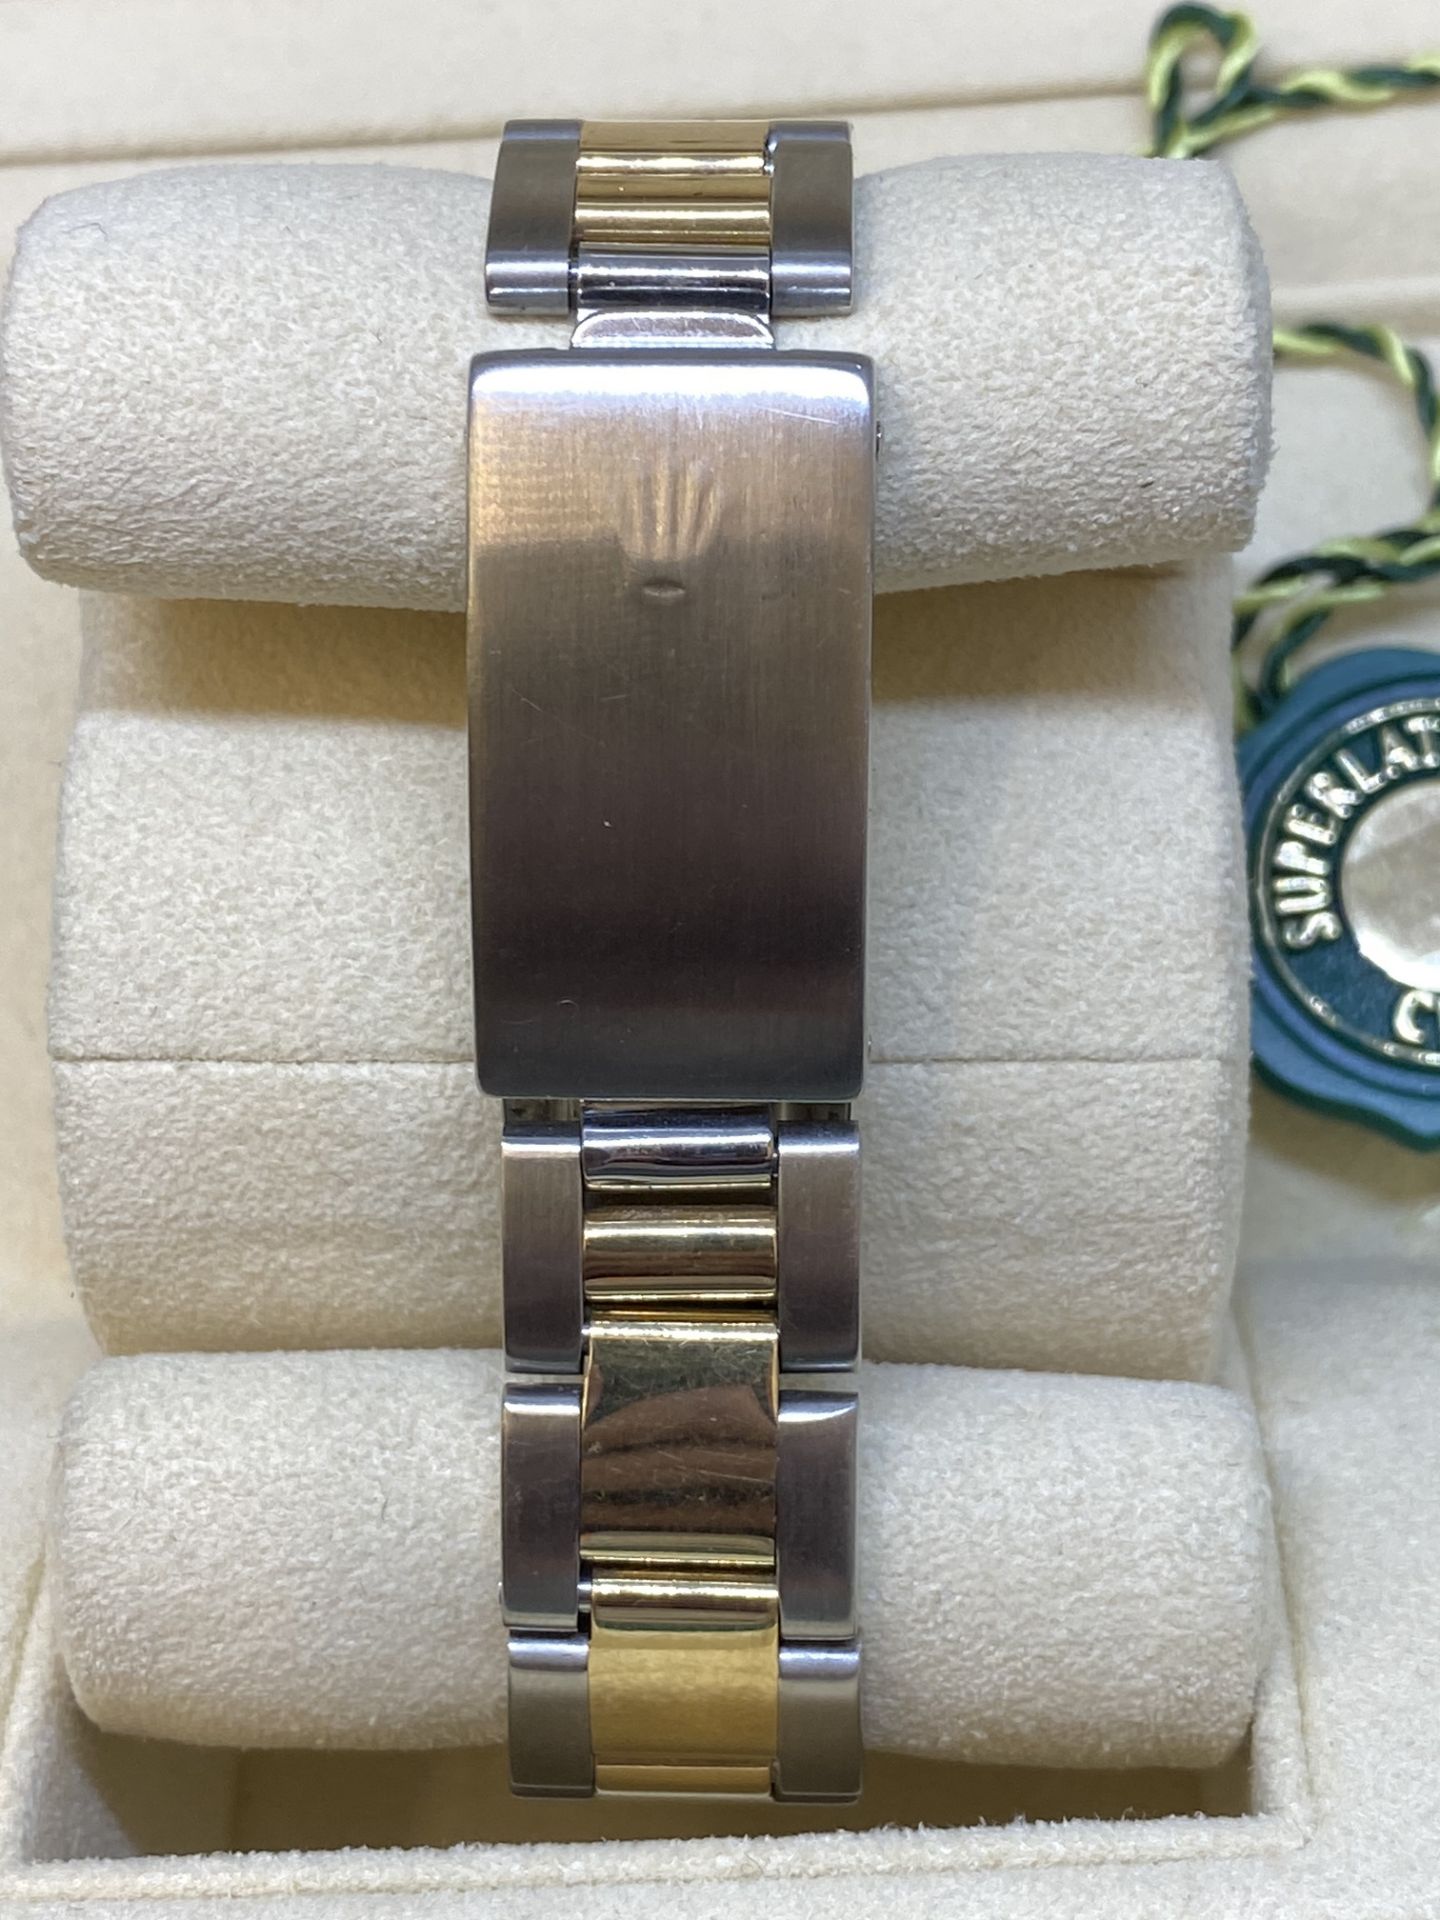 Rolex Steel & Gold Midsize Watch with Box - Image 6 of 10